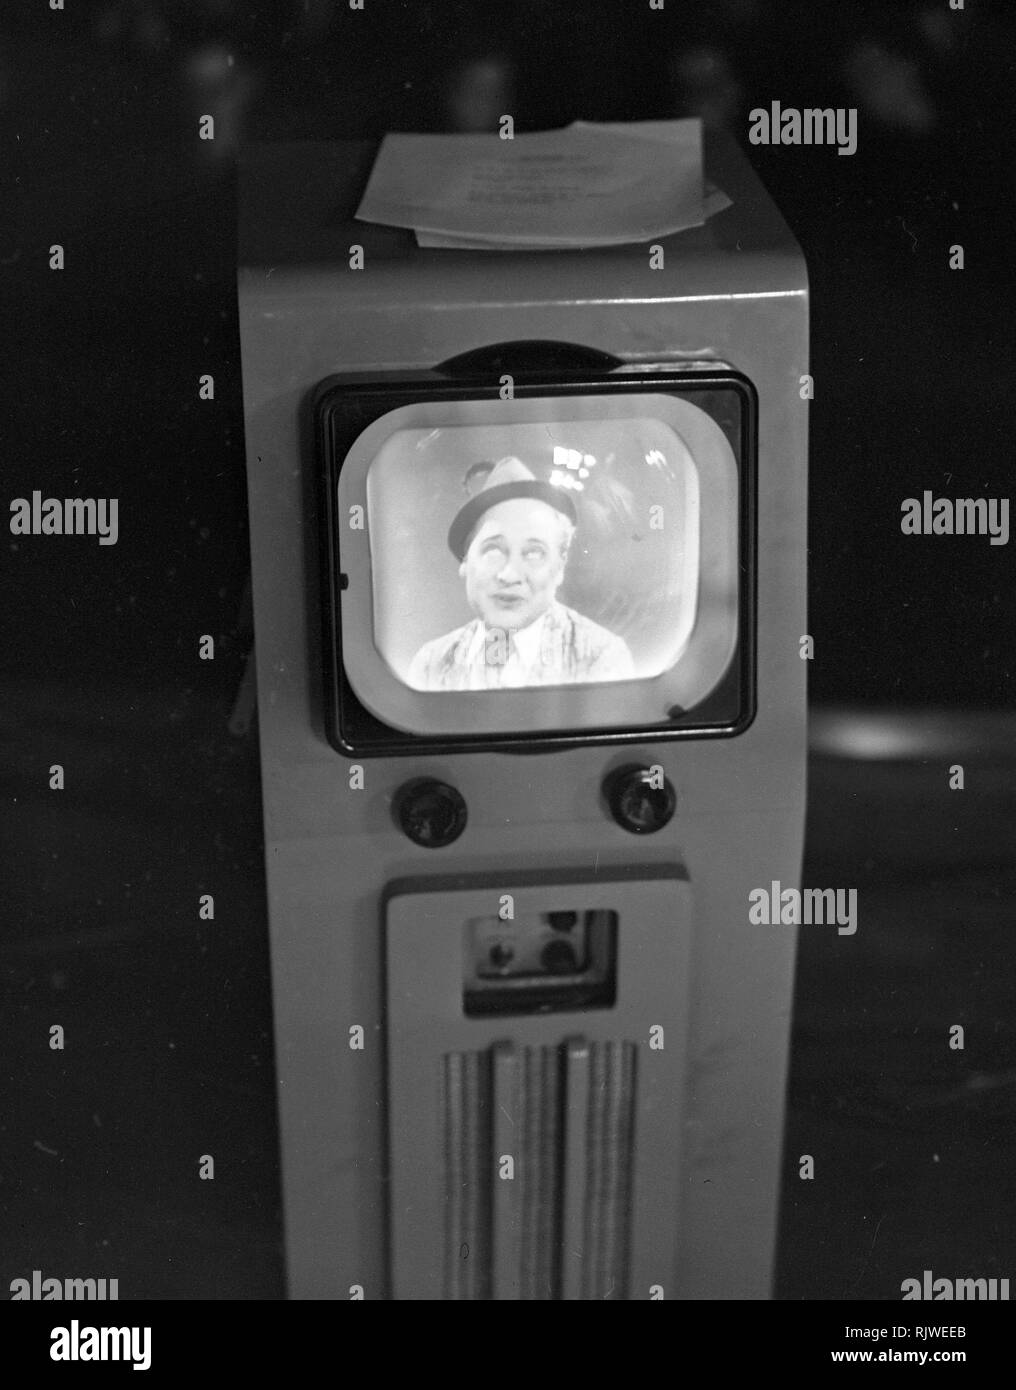 Television in the 1940s. Actor Max Hansen performing on televison 1948. A television broadcast prior national television and for viewing on only 15 tv recievers on the nearby department store NK. The British media company Pye Ltd, had already sucess with the new tv medum and was early one of BBC s suppliers of tv technology. Photo Kristoffersson ref 229a-2. Stock Photo